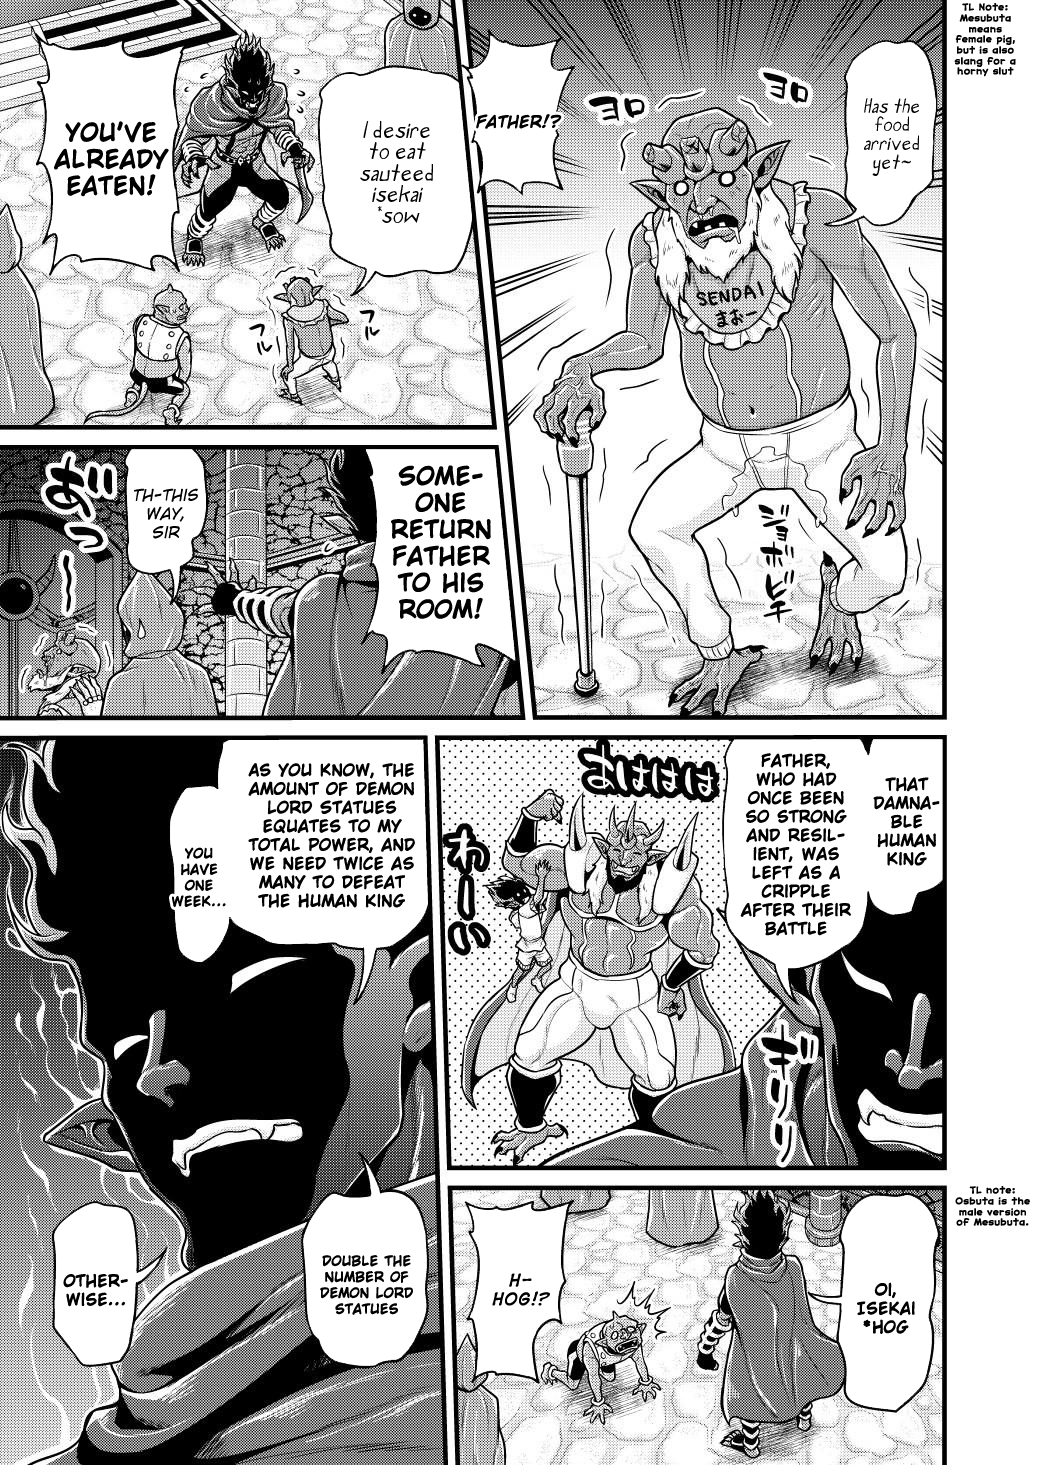 Filming Adult Videos in Another World - Chapter 5 Page 4